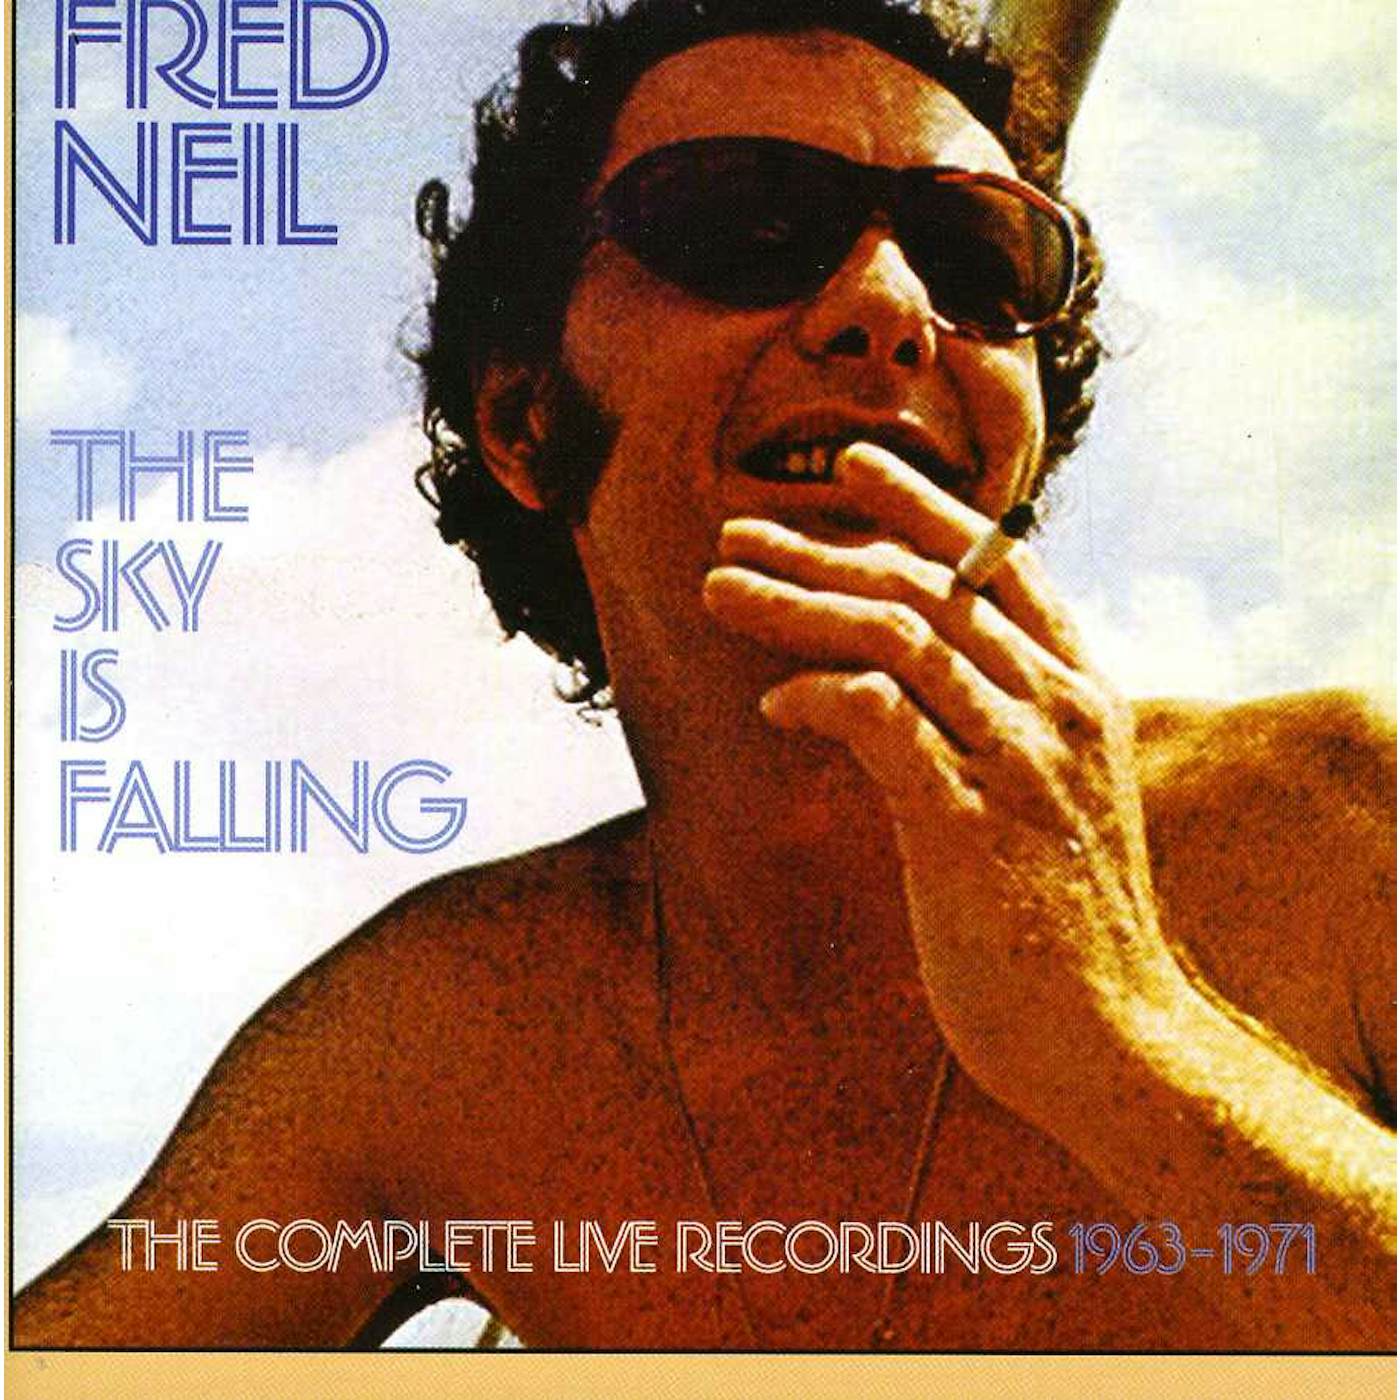 Fred Neil SKY IS FALLING: COMPLETE LIVE 1965-1971 CD